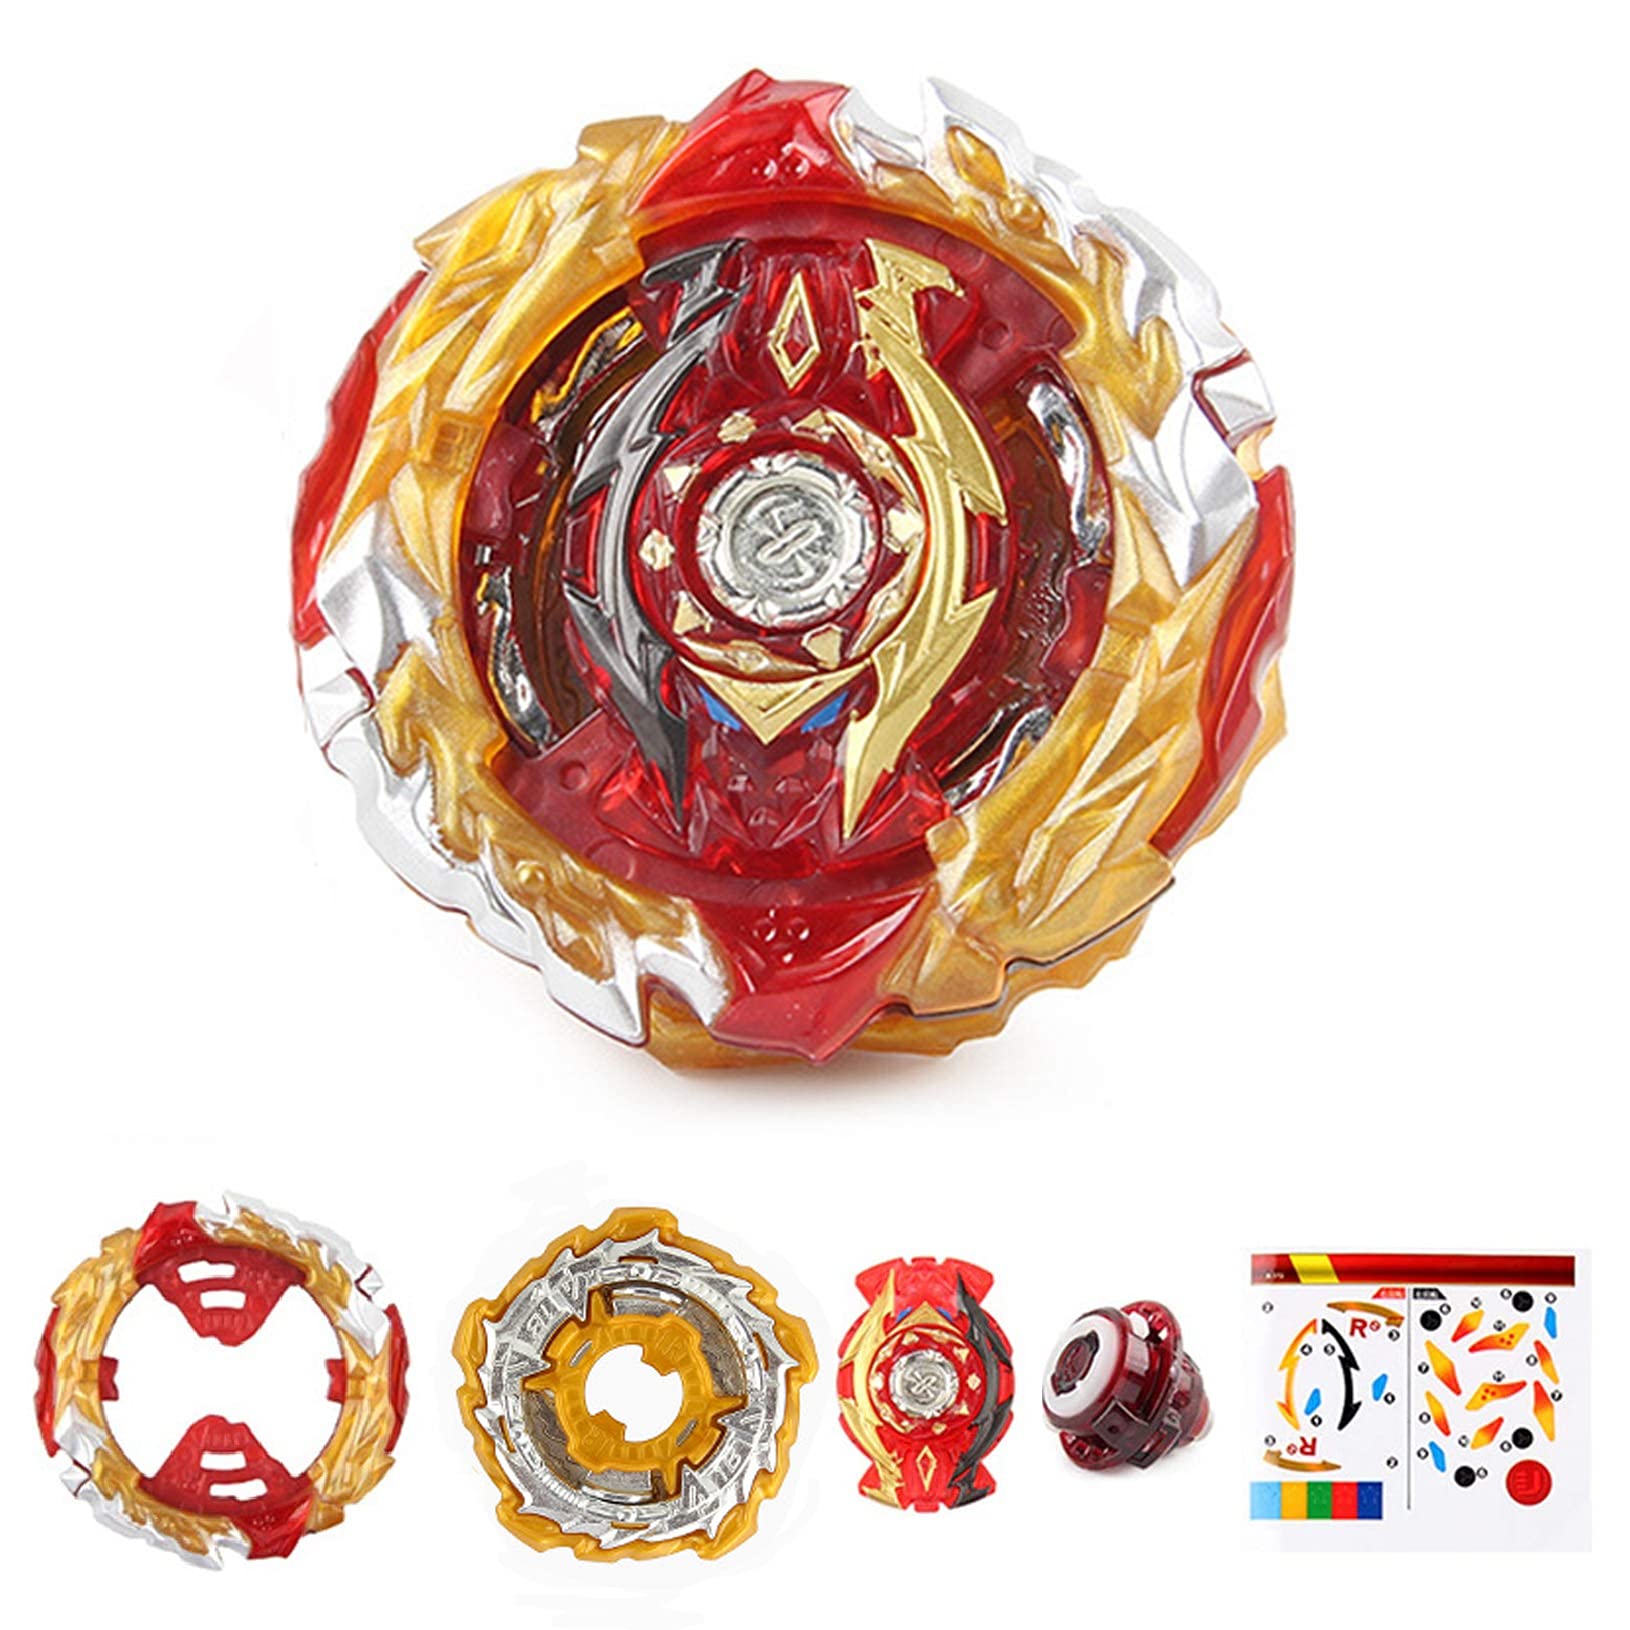 Battling Sparking String Launcher, World Spriggan Top Burst Launcher Set, Left and Right Spin String Launcher Grip Compatible with All Bey Burst Series - Red